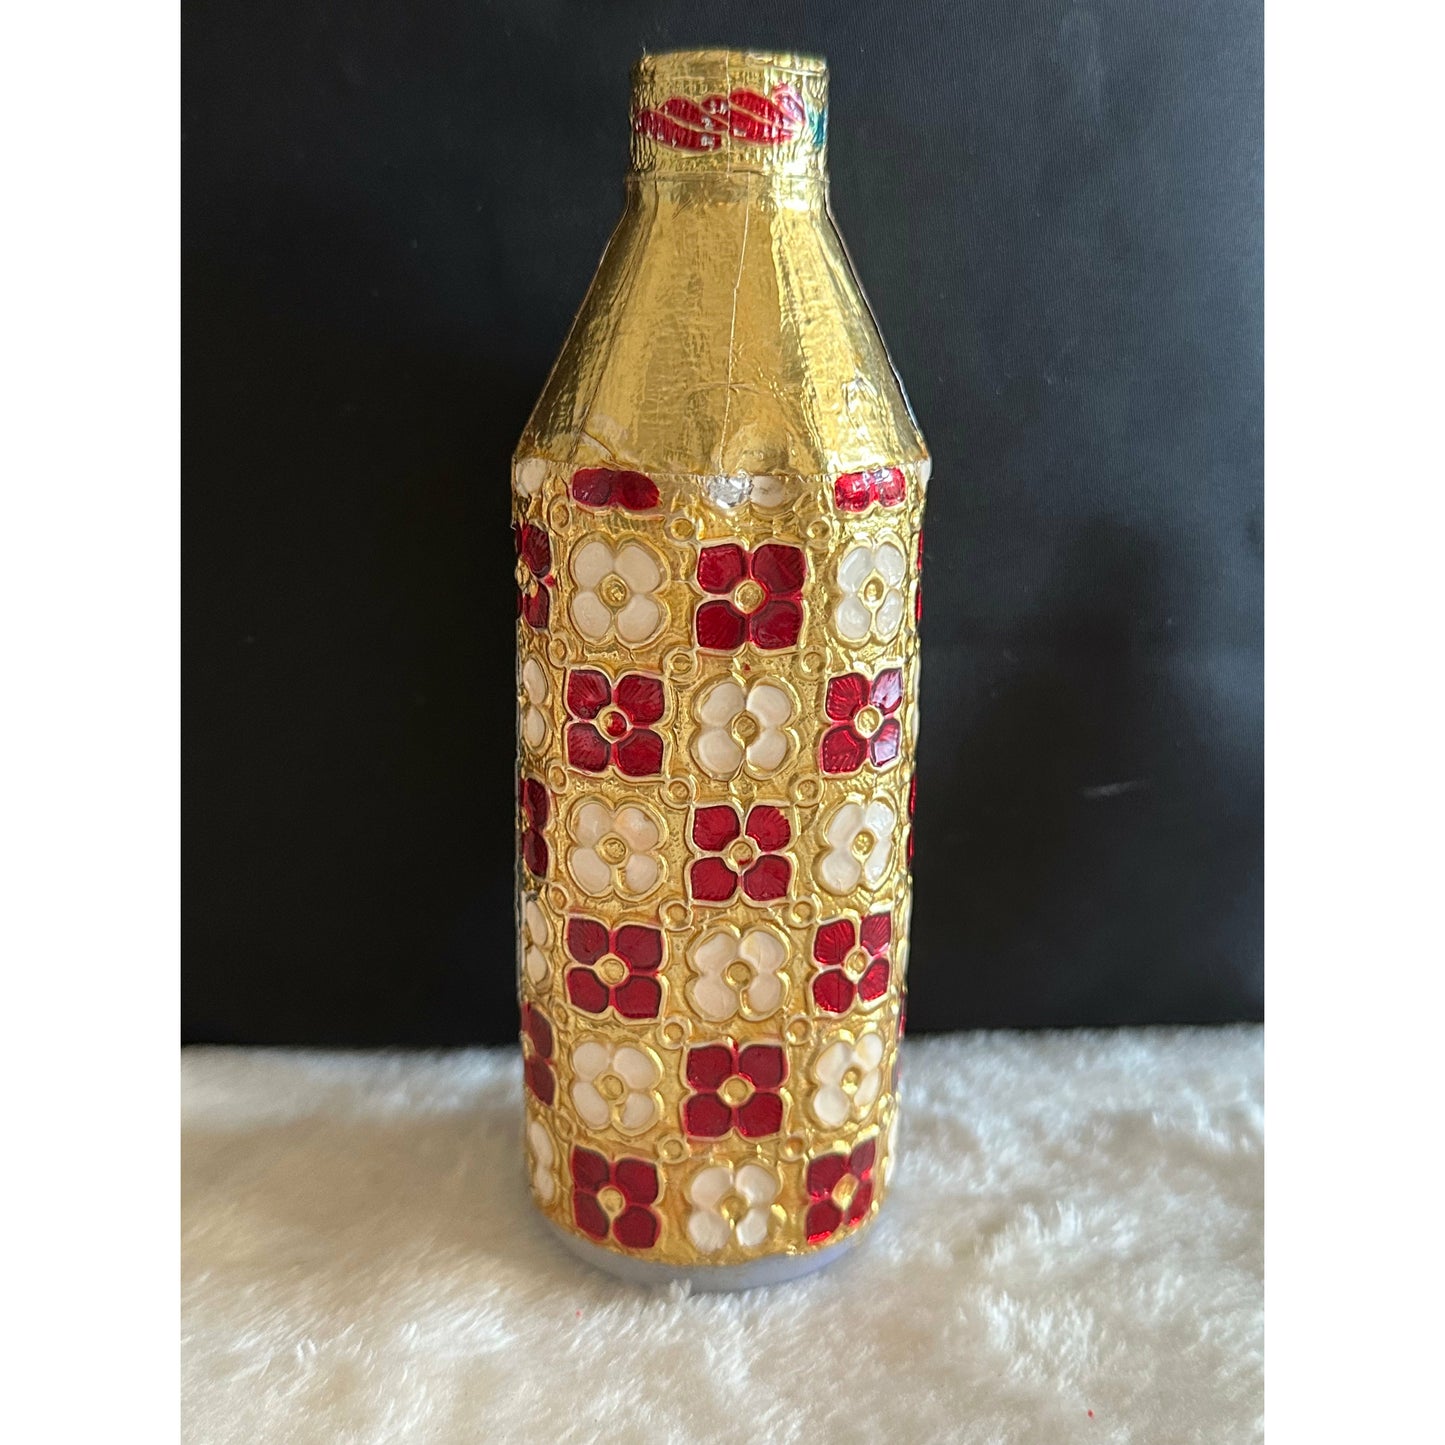 Oil bottle/keep for wedding rituals